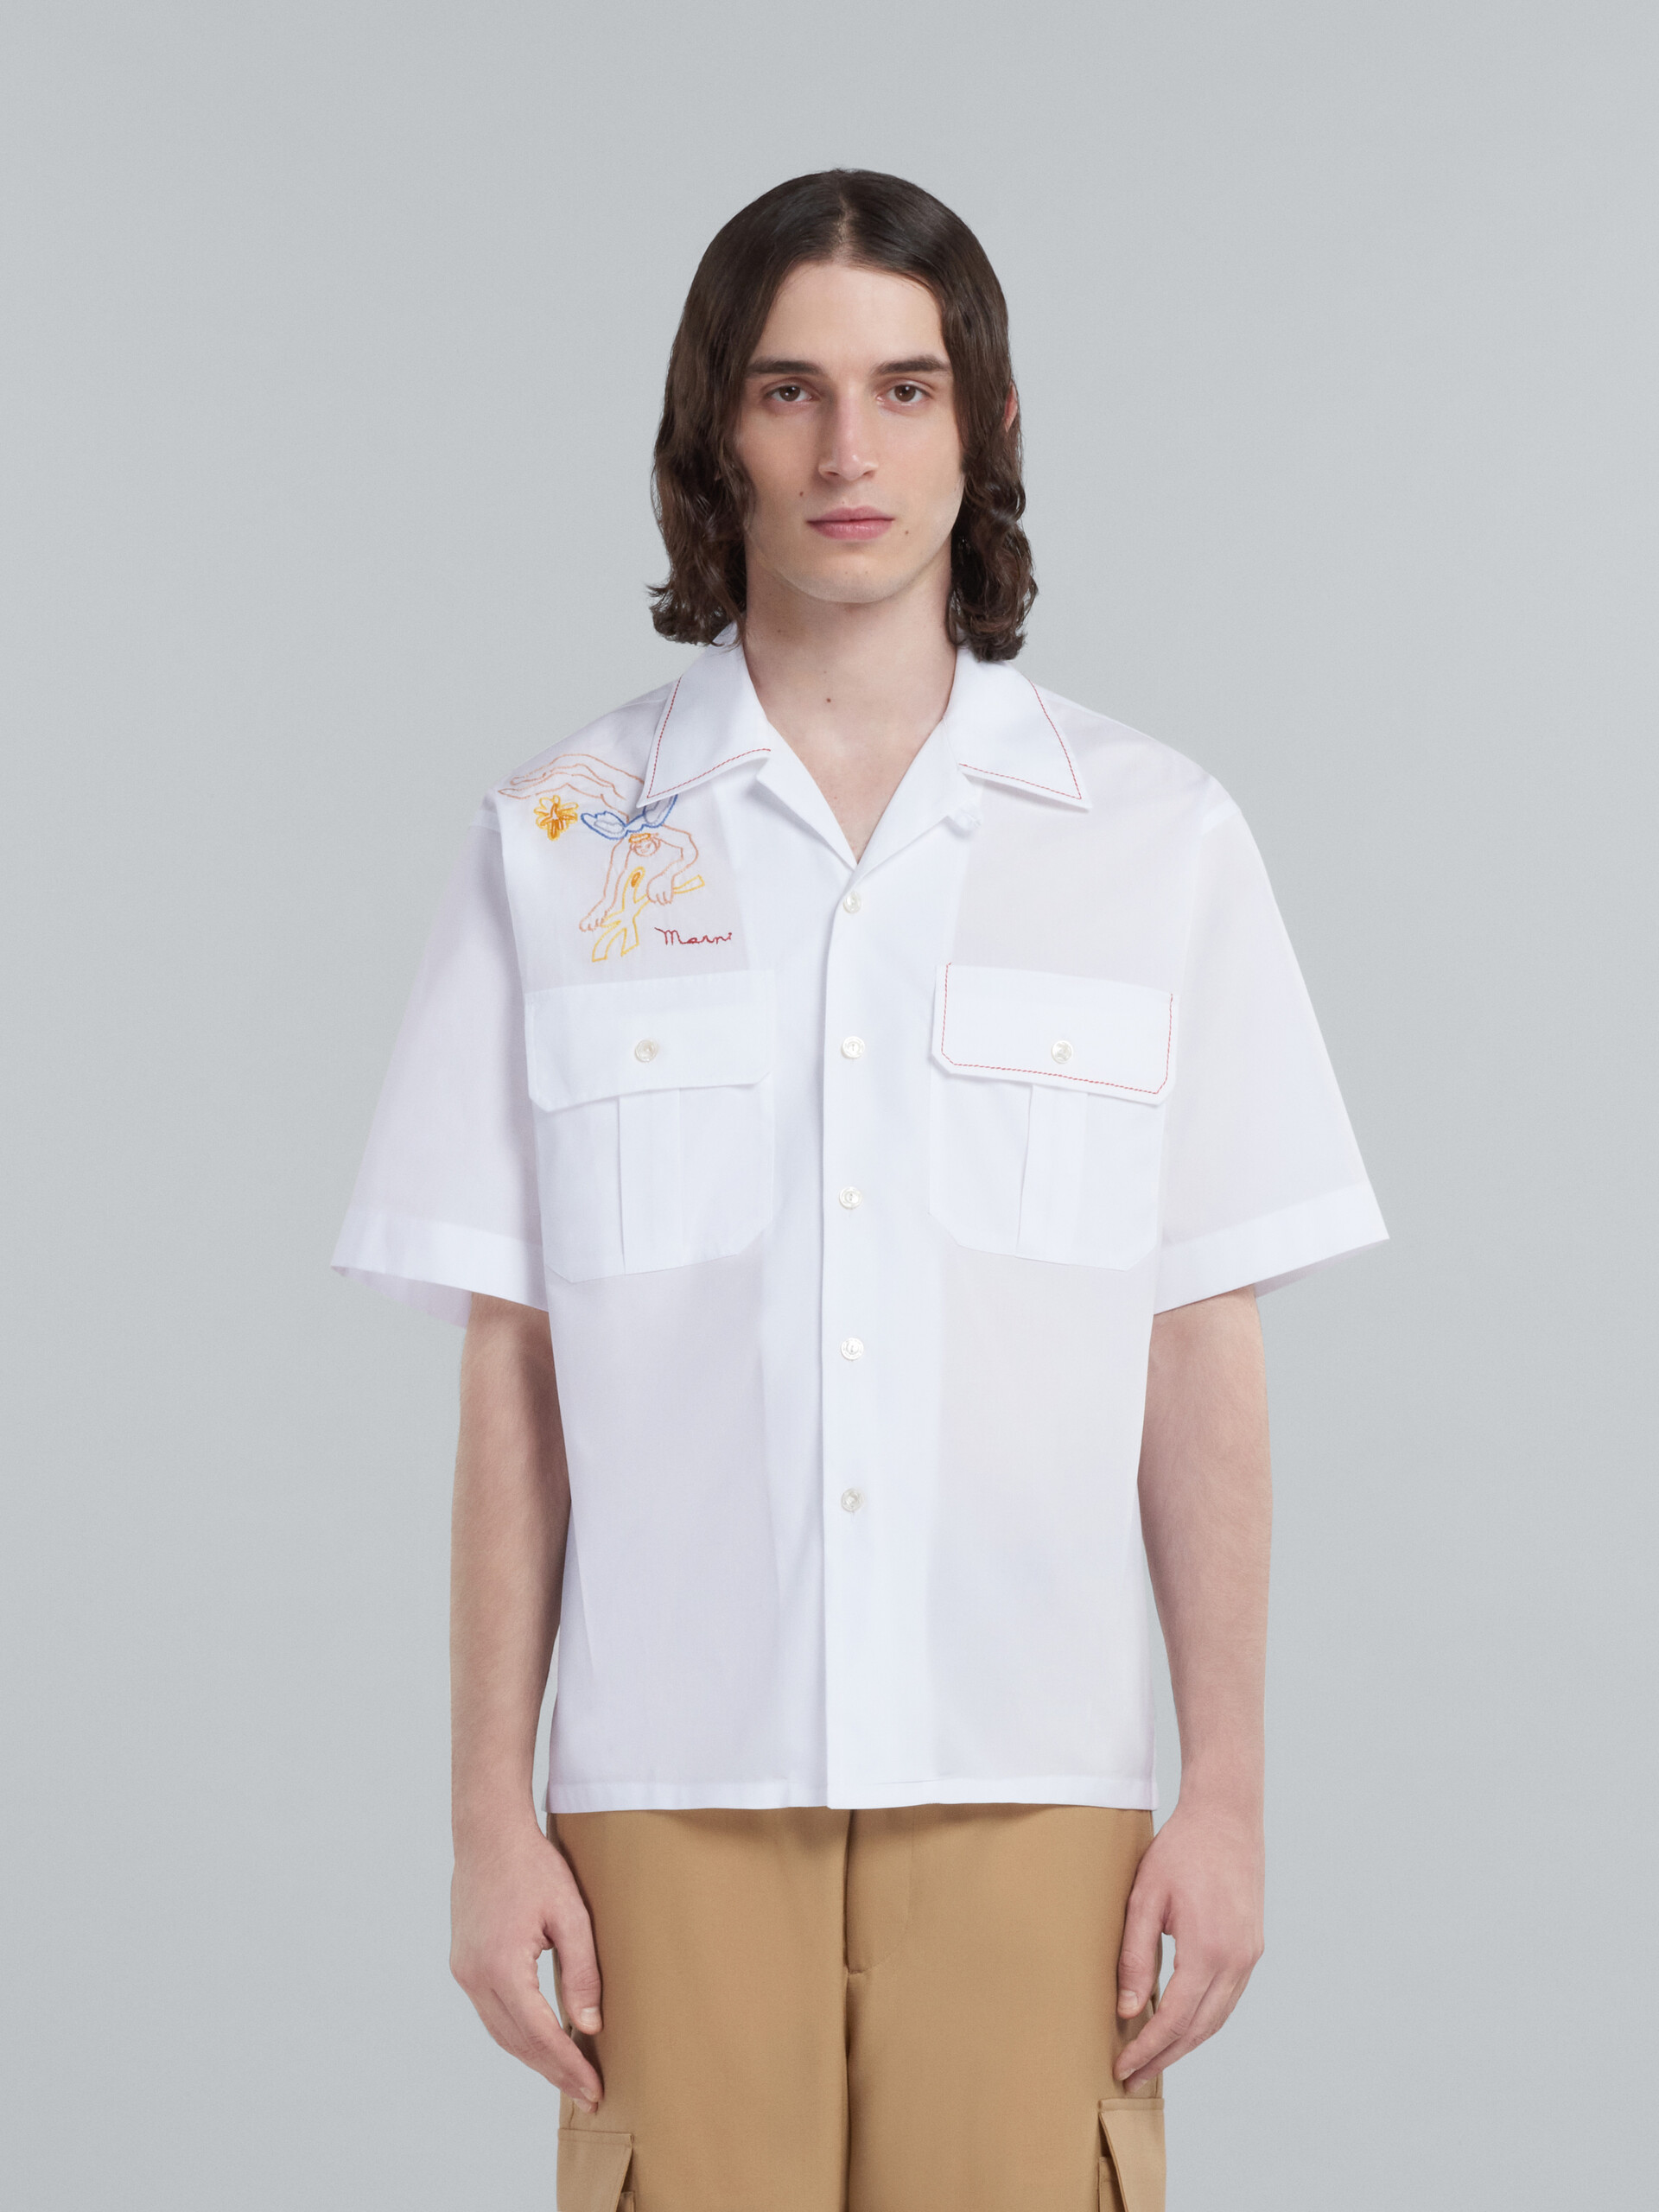 White poplin shirt with embroidery - Shirts - Image 2